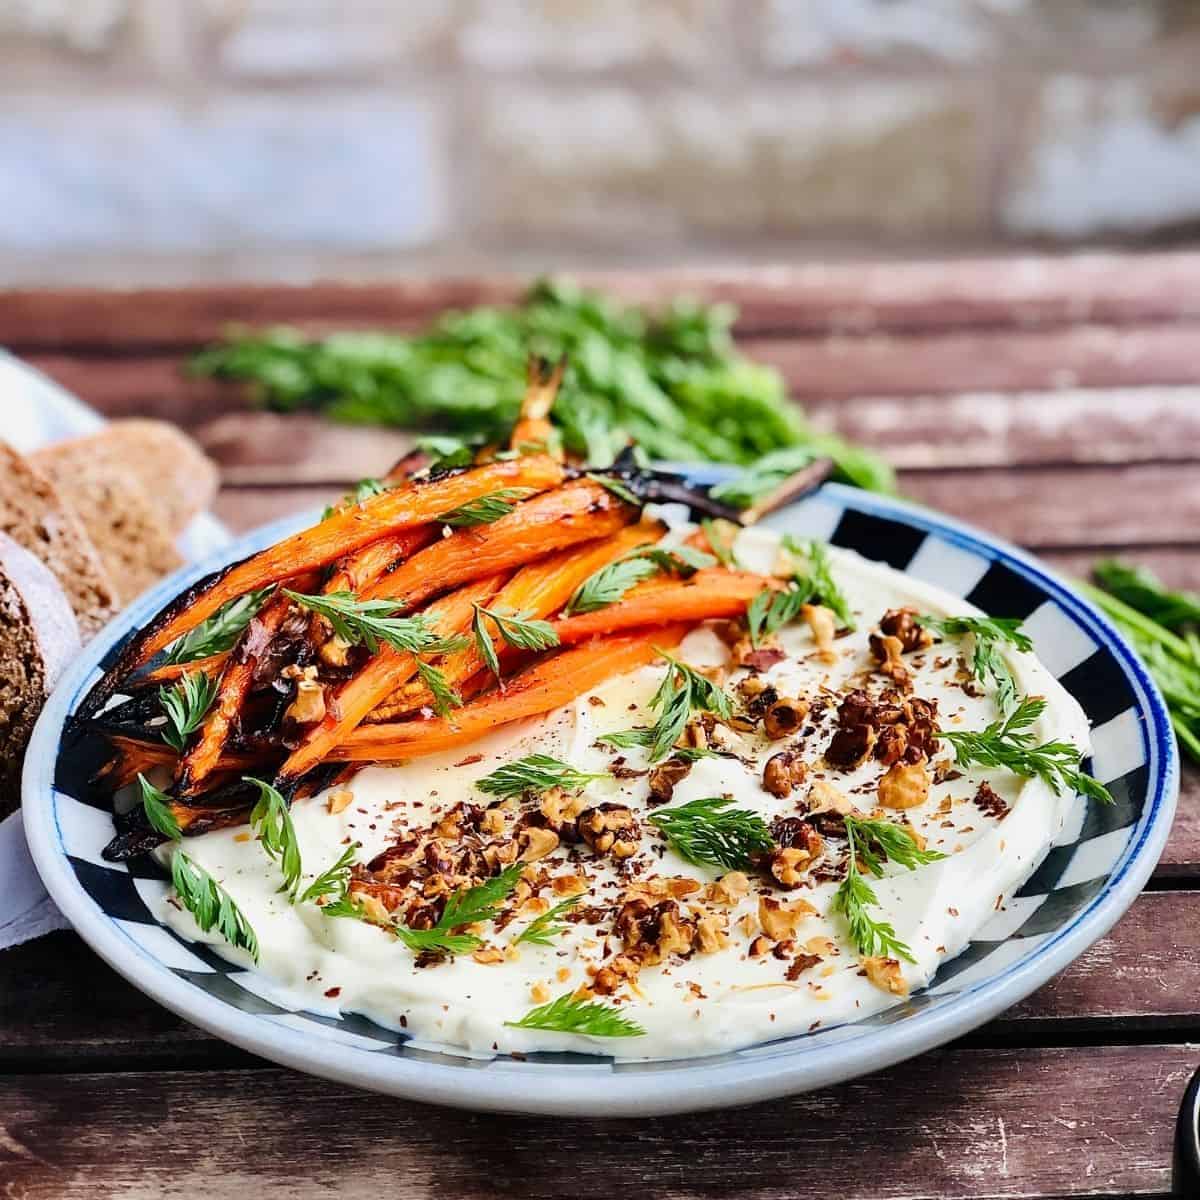 A plate of dairy free labnah garnished with walnut and accompanied by baby carrots